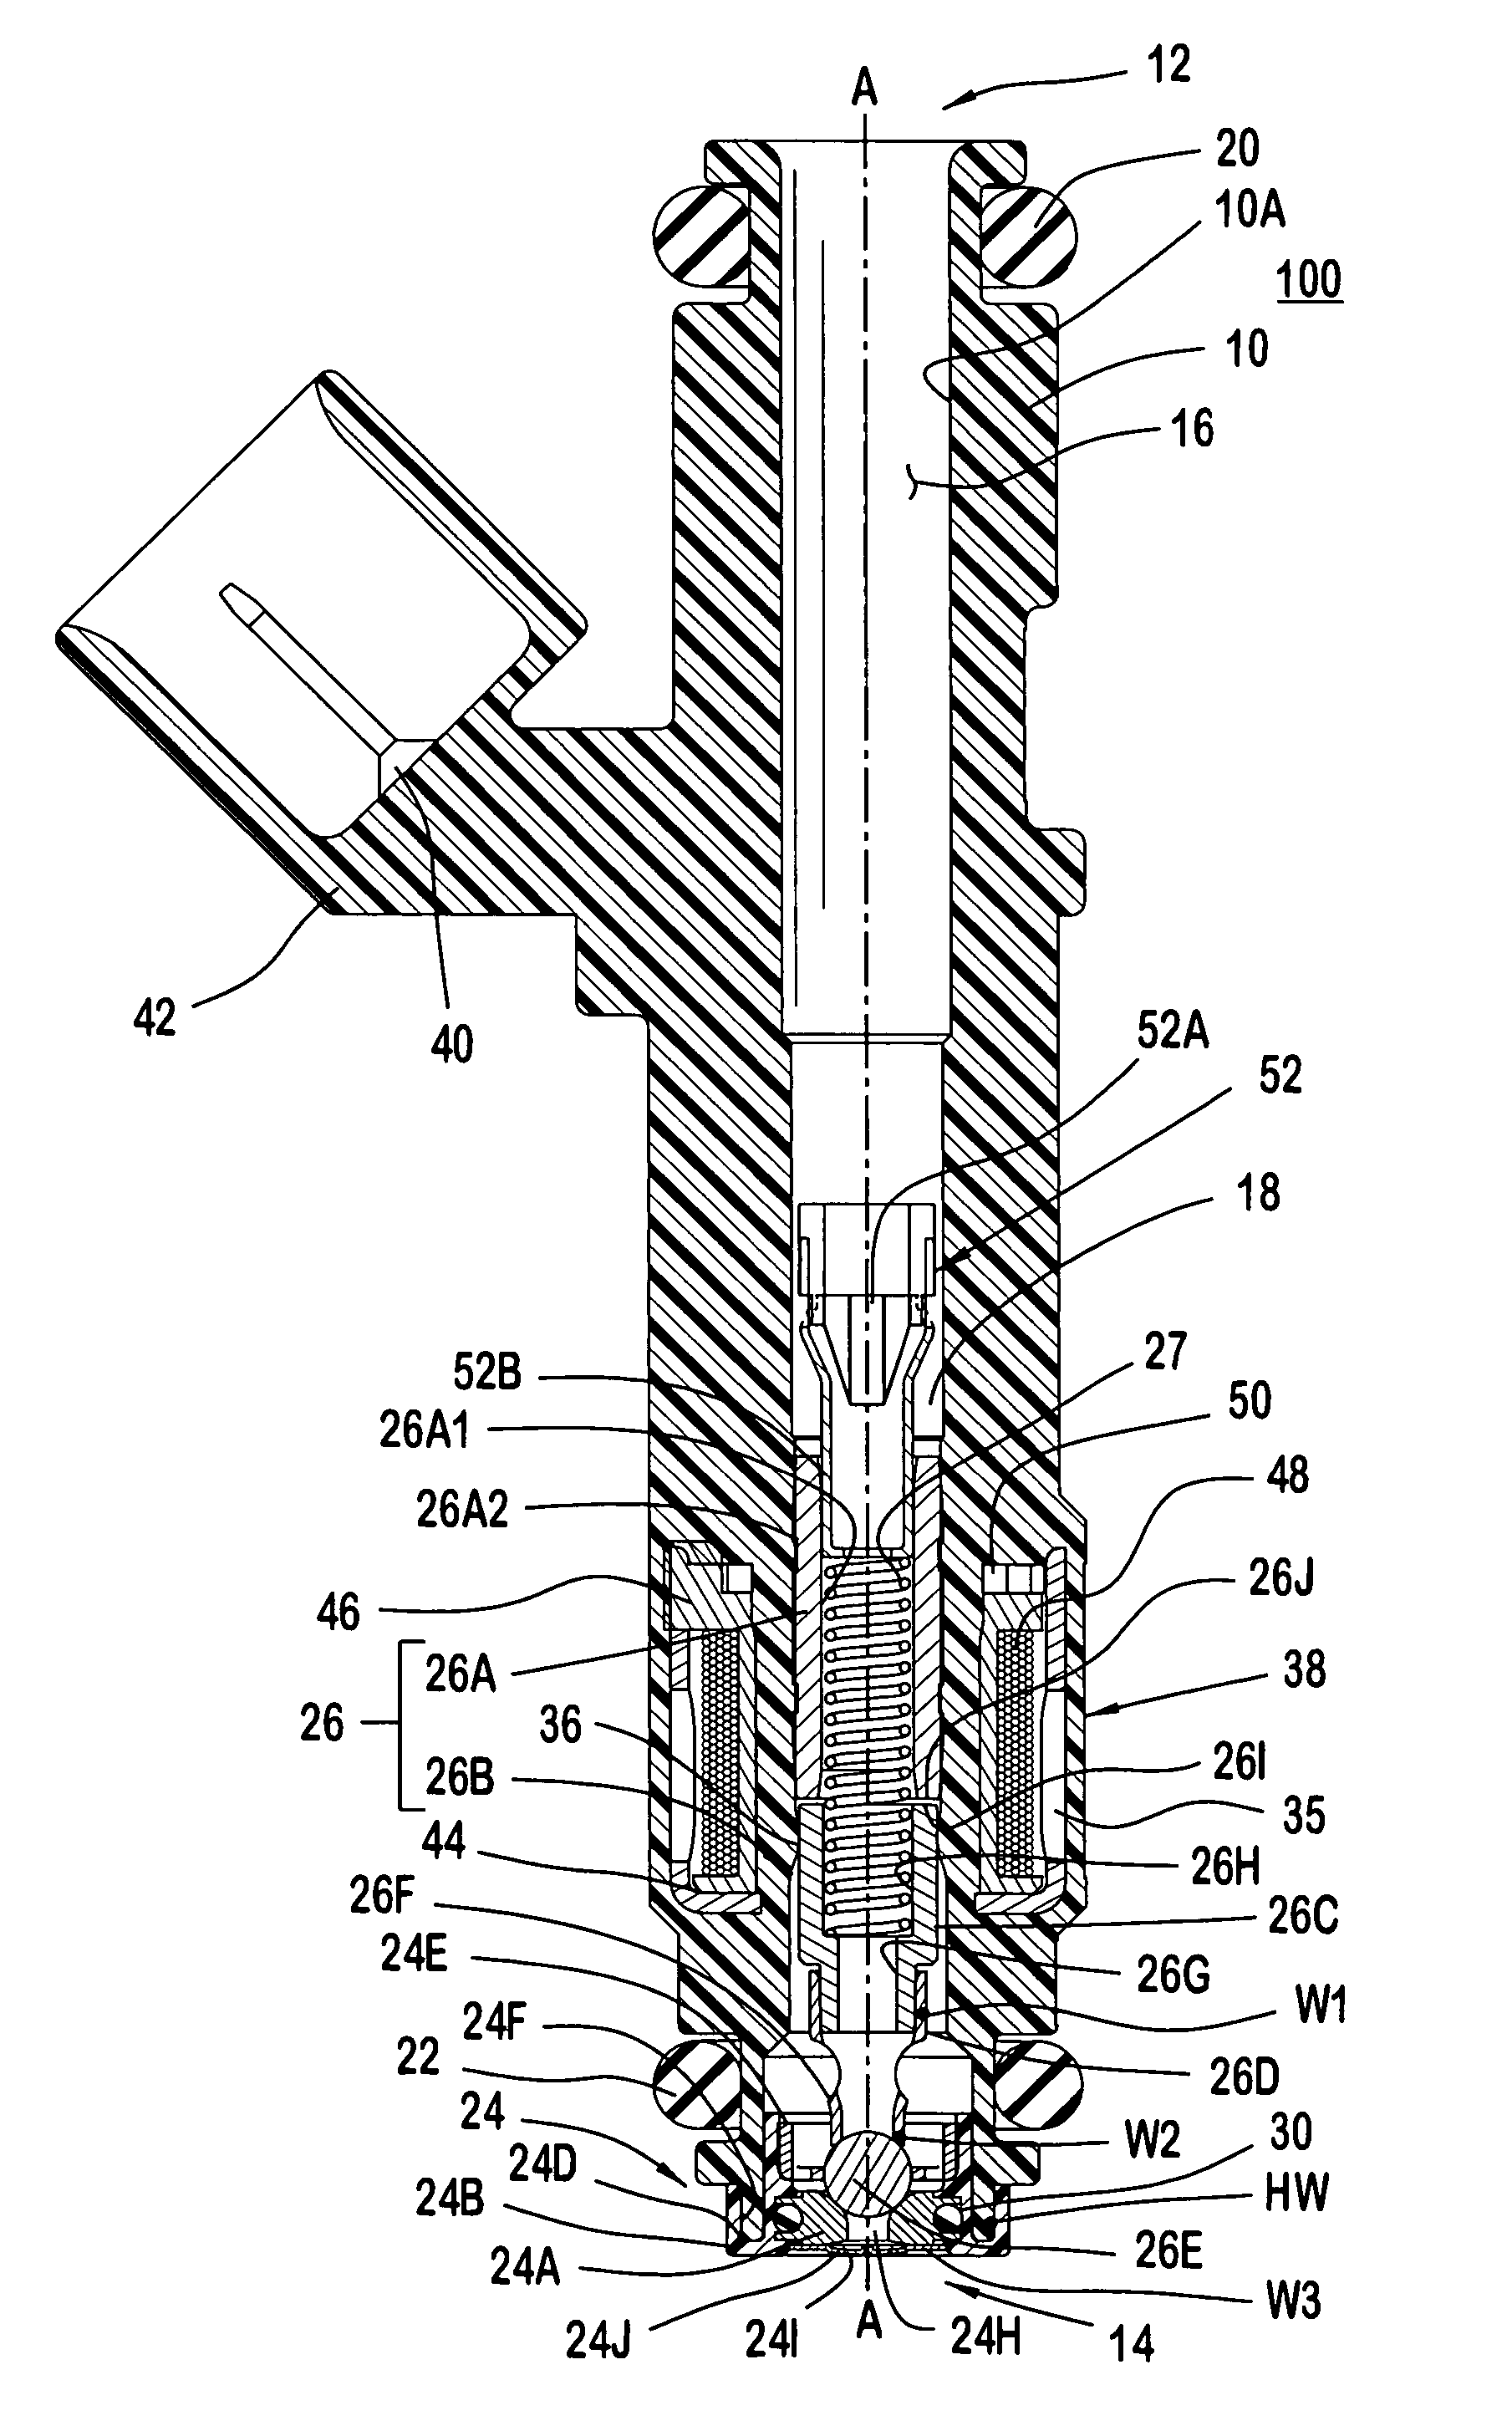 Method of manufacturing a polymeric bodied fuel injector